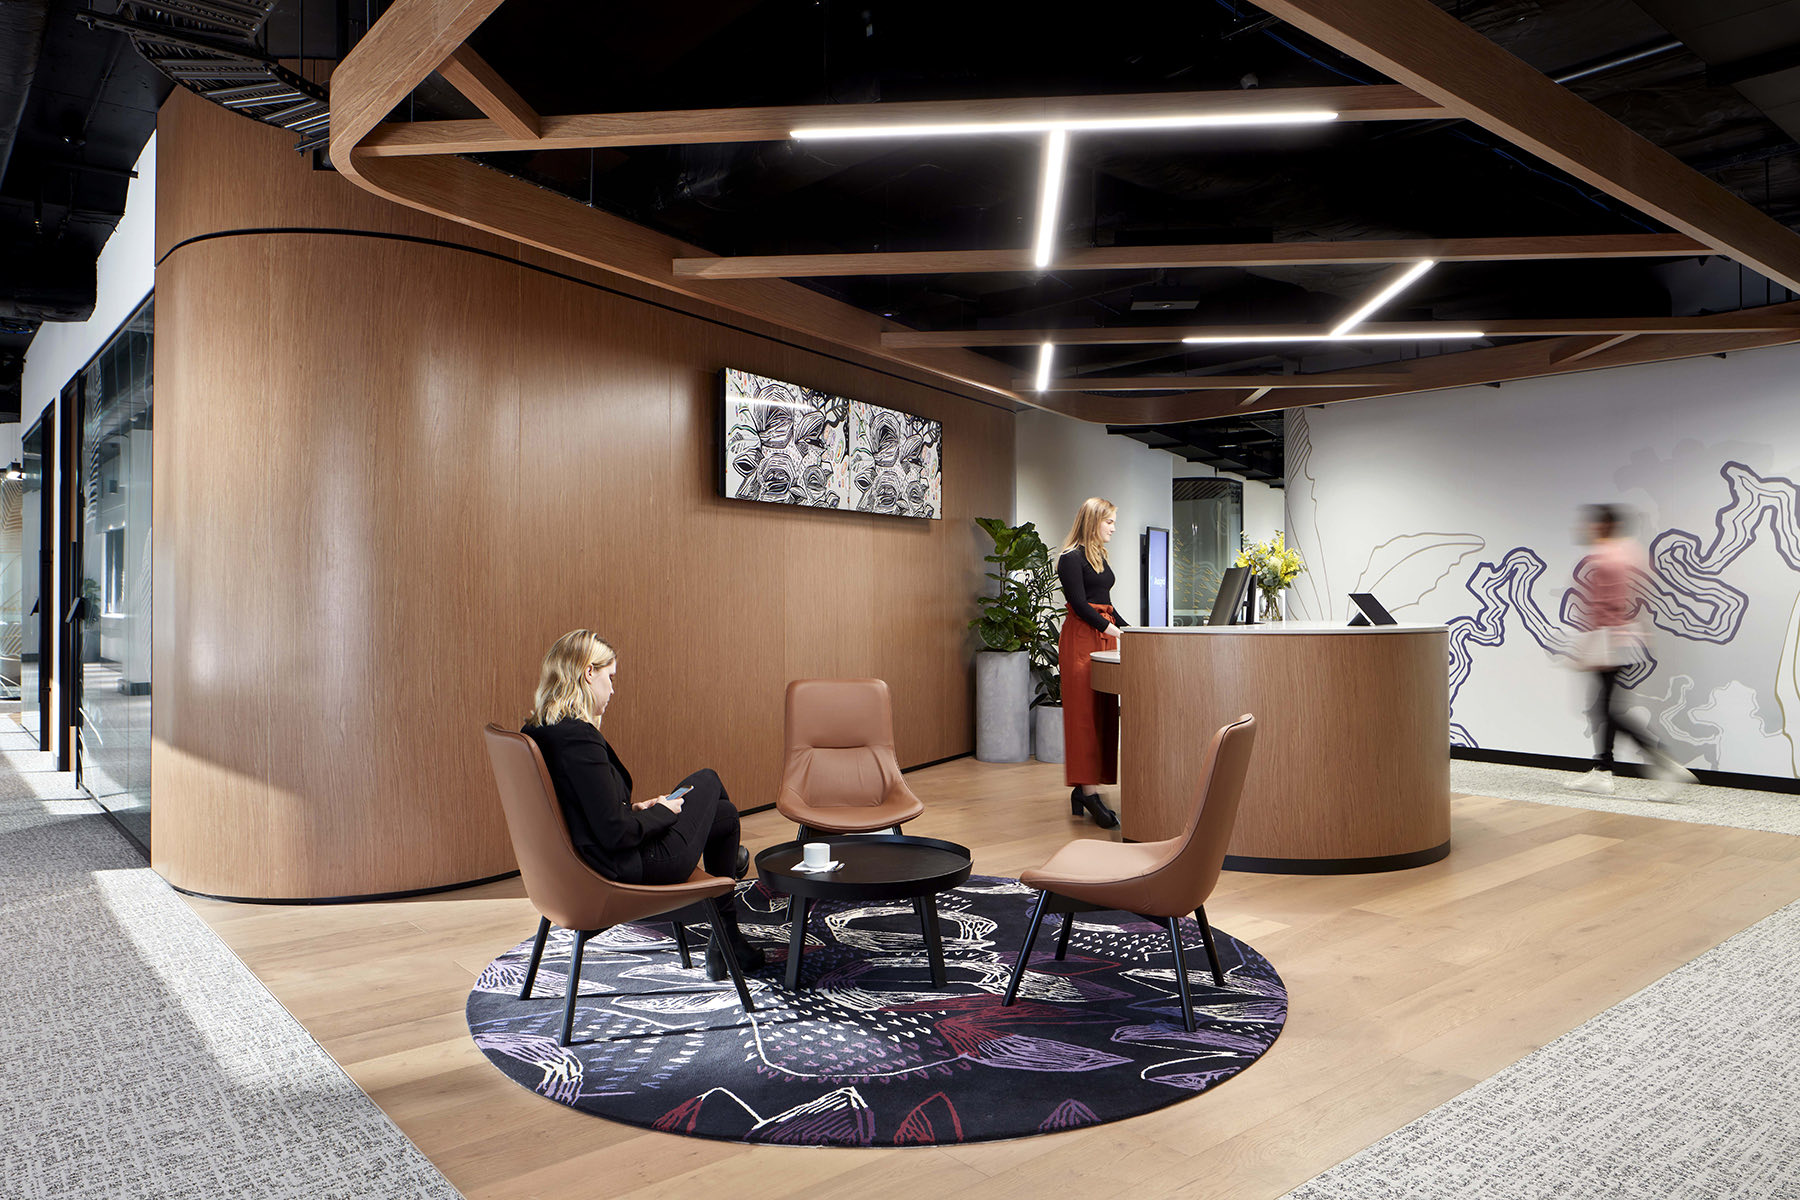 A Look Inside Private Energy Provider Offices in Sydney